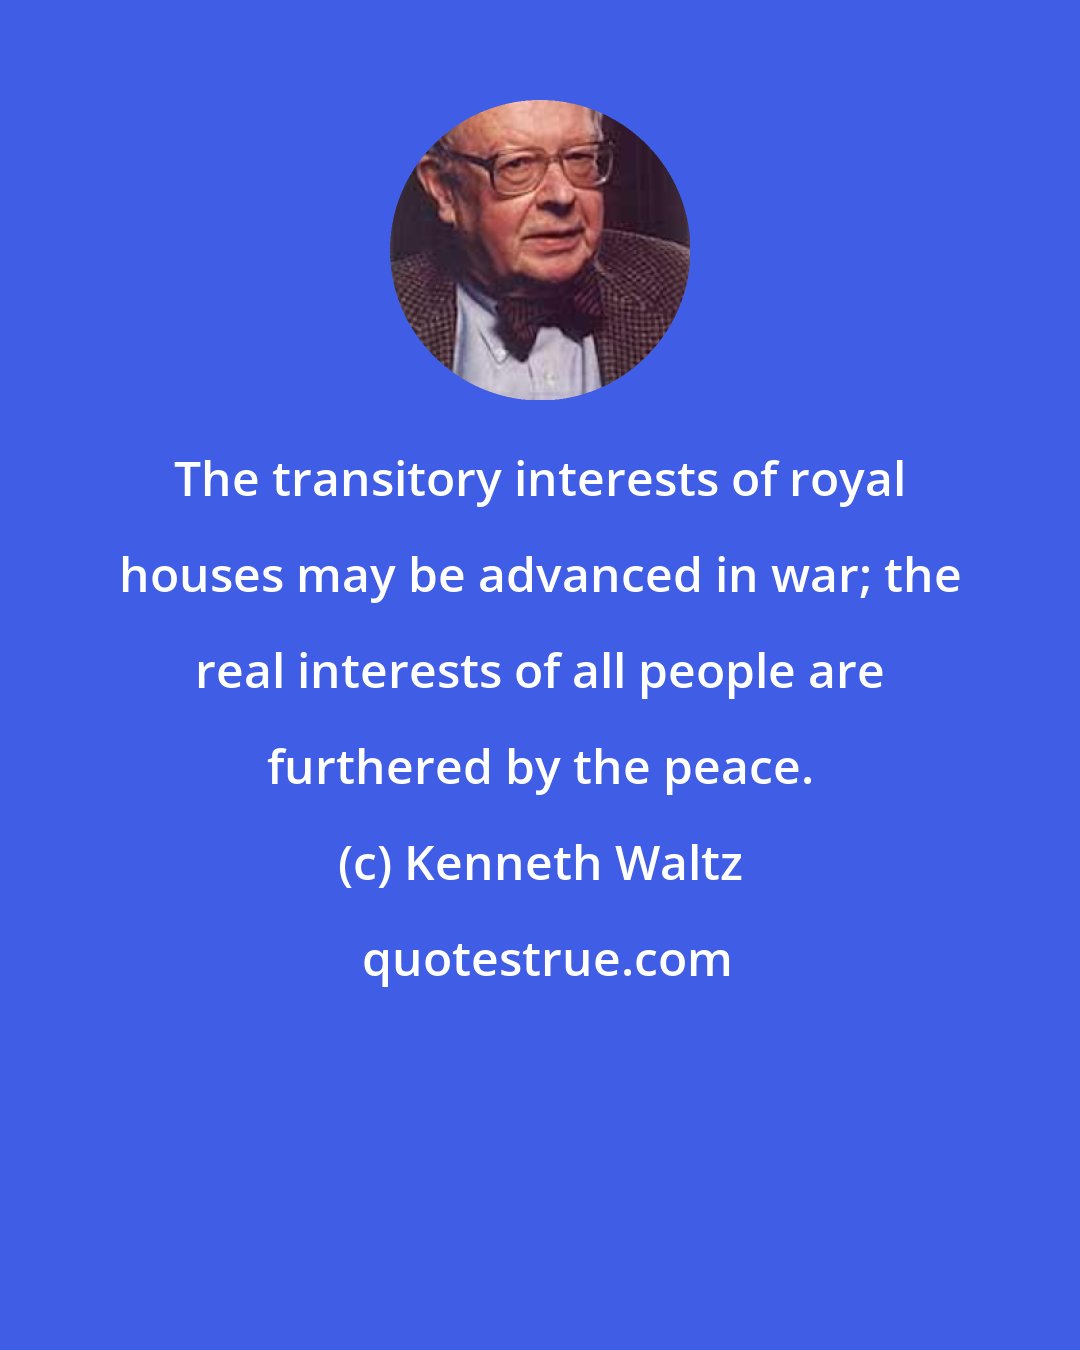 Kenneth Waltz: The transitory interests of royal houses may be advanced in war; the real interests of all people are furthered by the peace.